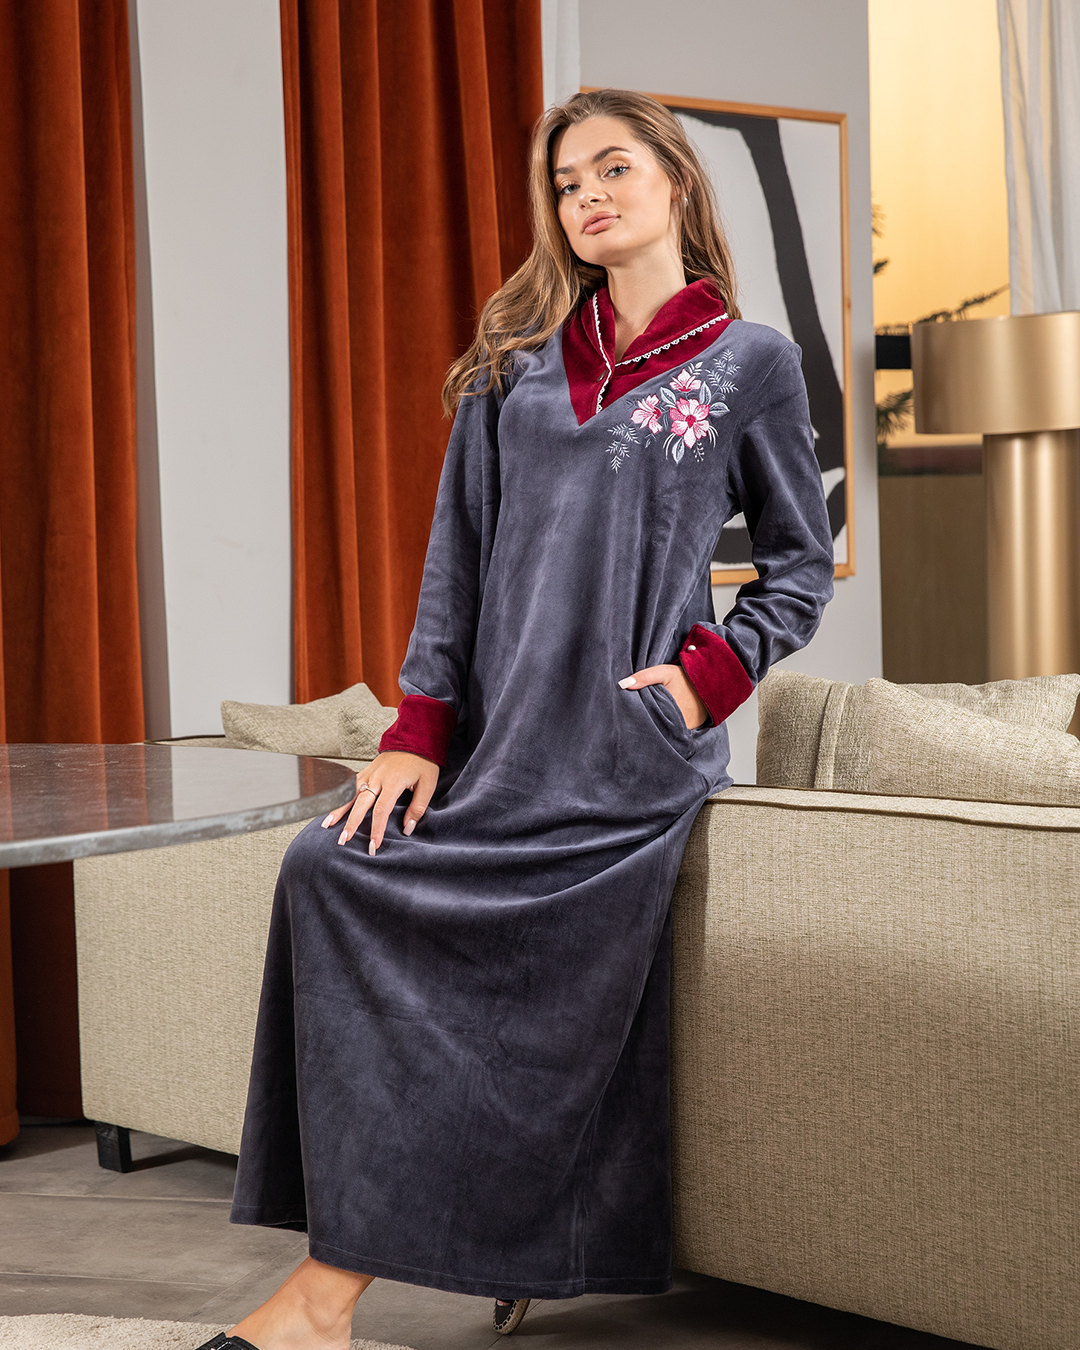 Women's velor shirt, cool shawl, embroidered with roses